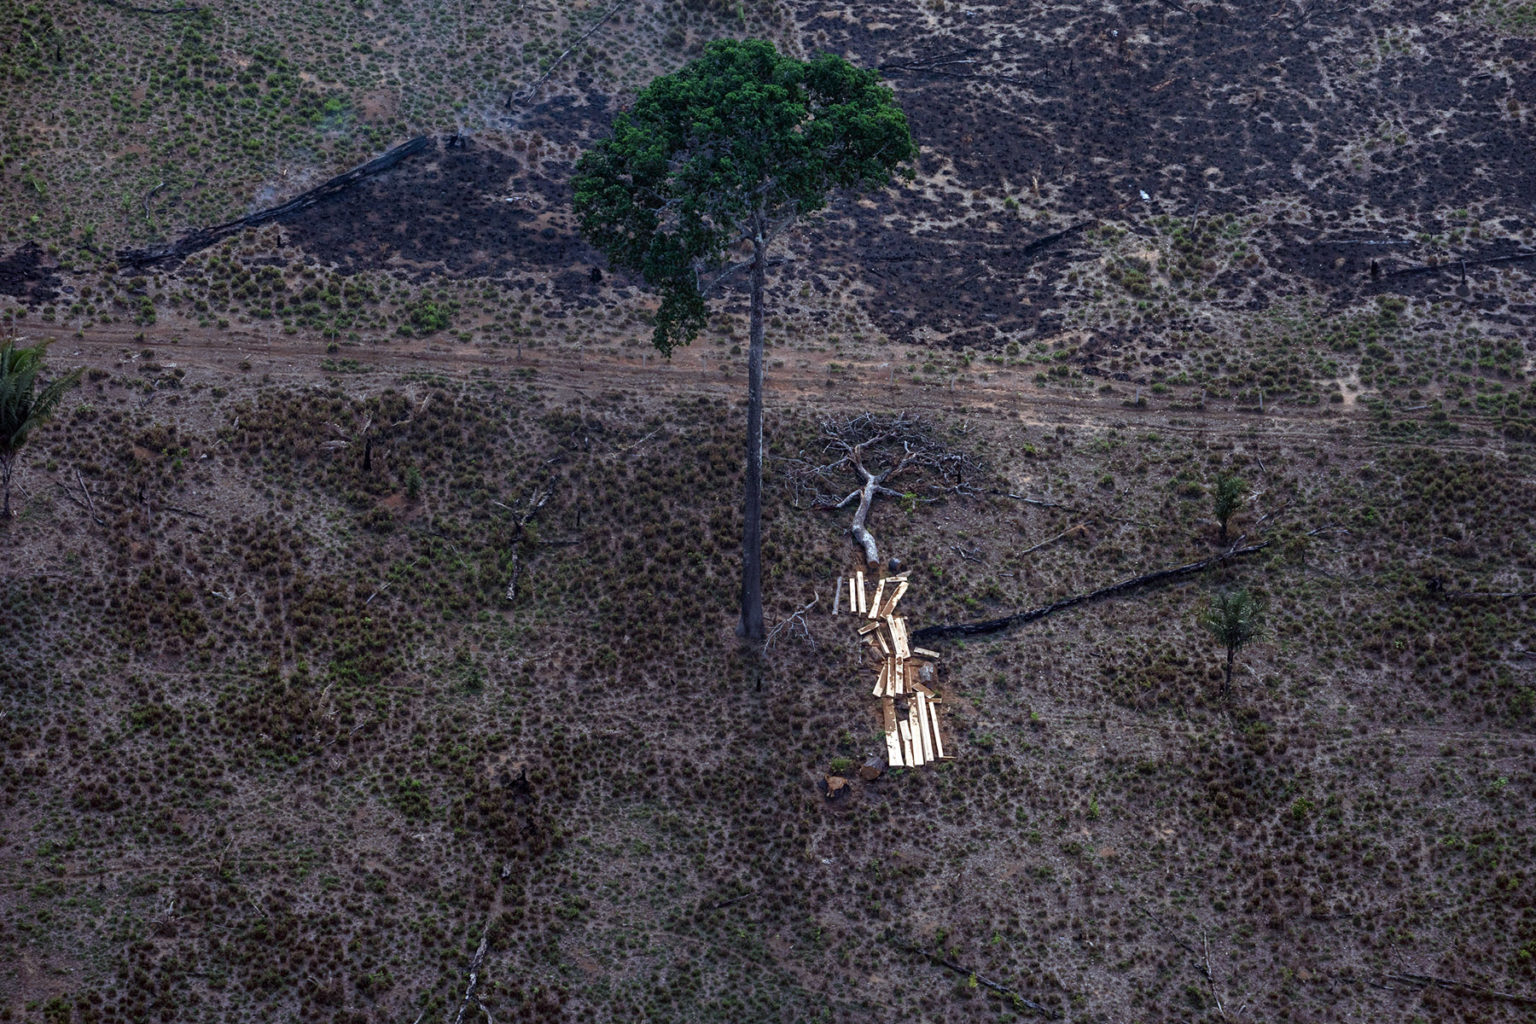 Aerial view of an area in the Amazon deforested for cattle ranching. Photo: Victor Moriyama / Greenpeace